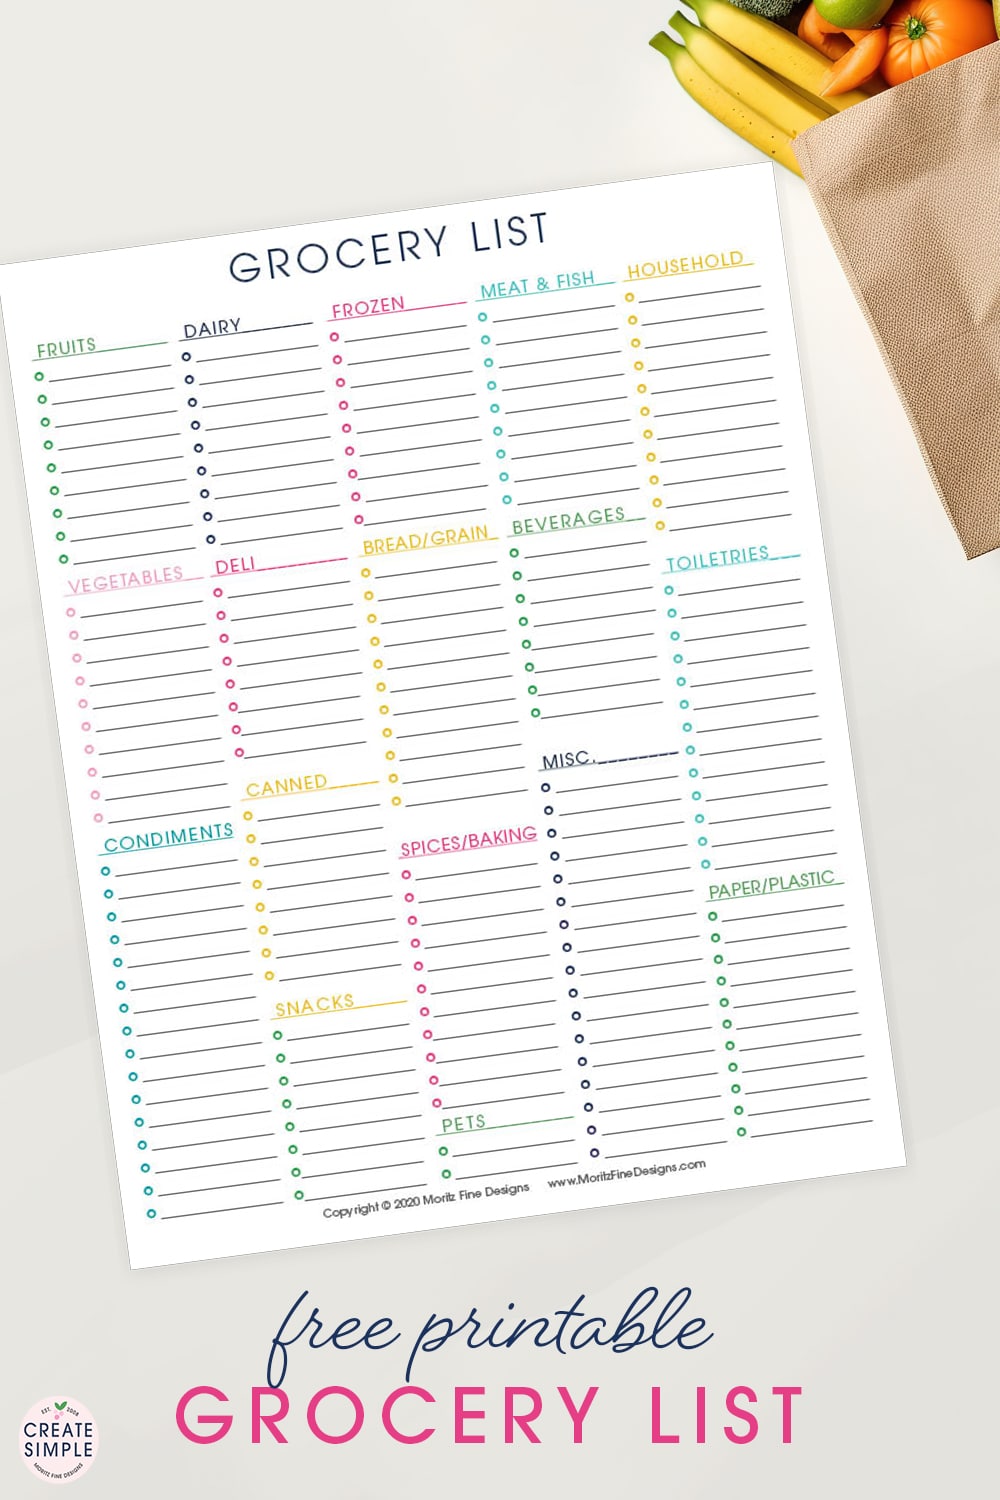 Print this Free Printable Grocery List--hang it on your fridge and compile a list of items you need at the grocery store.